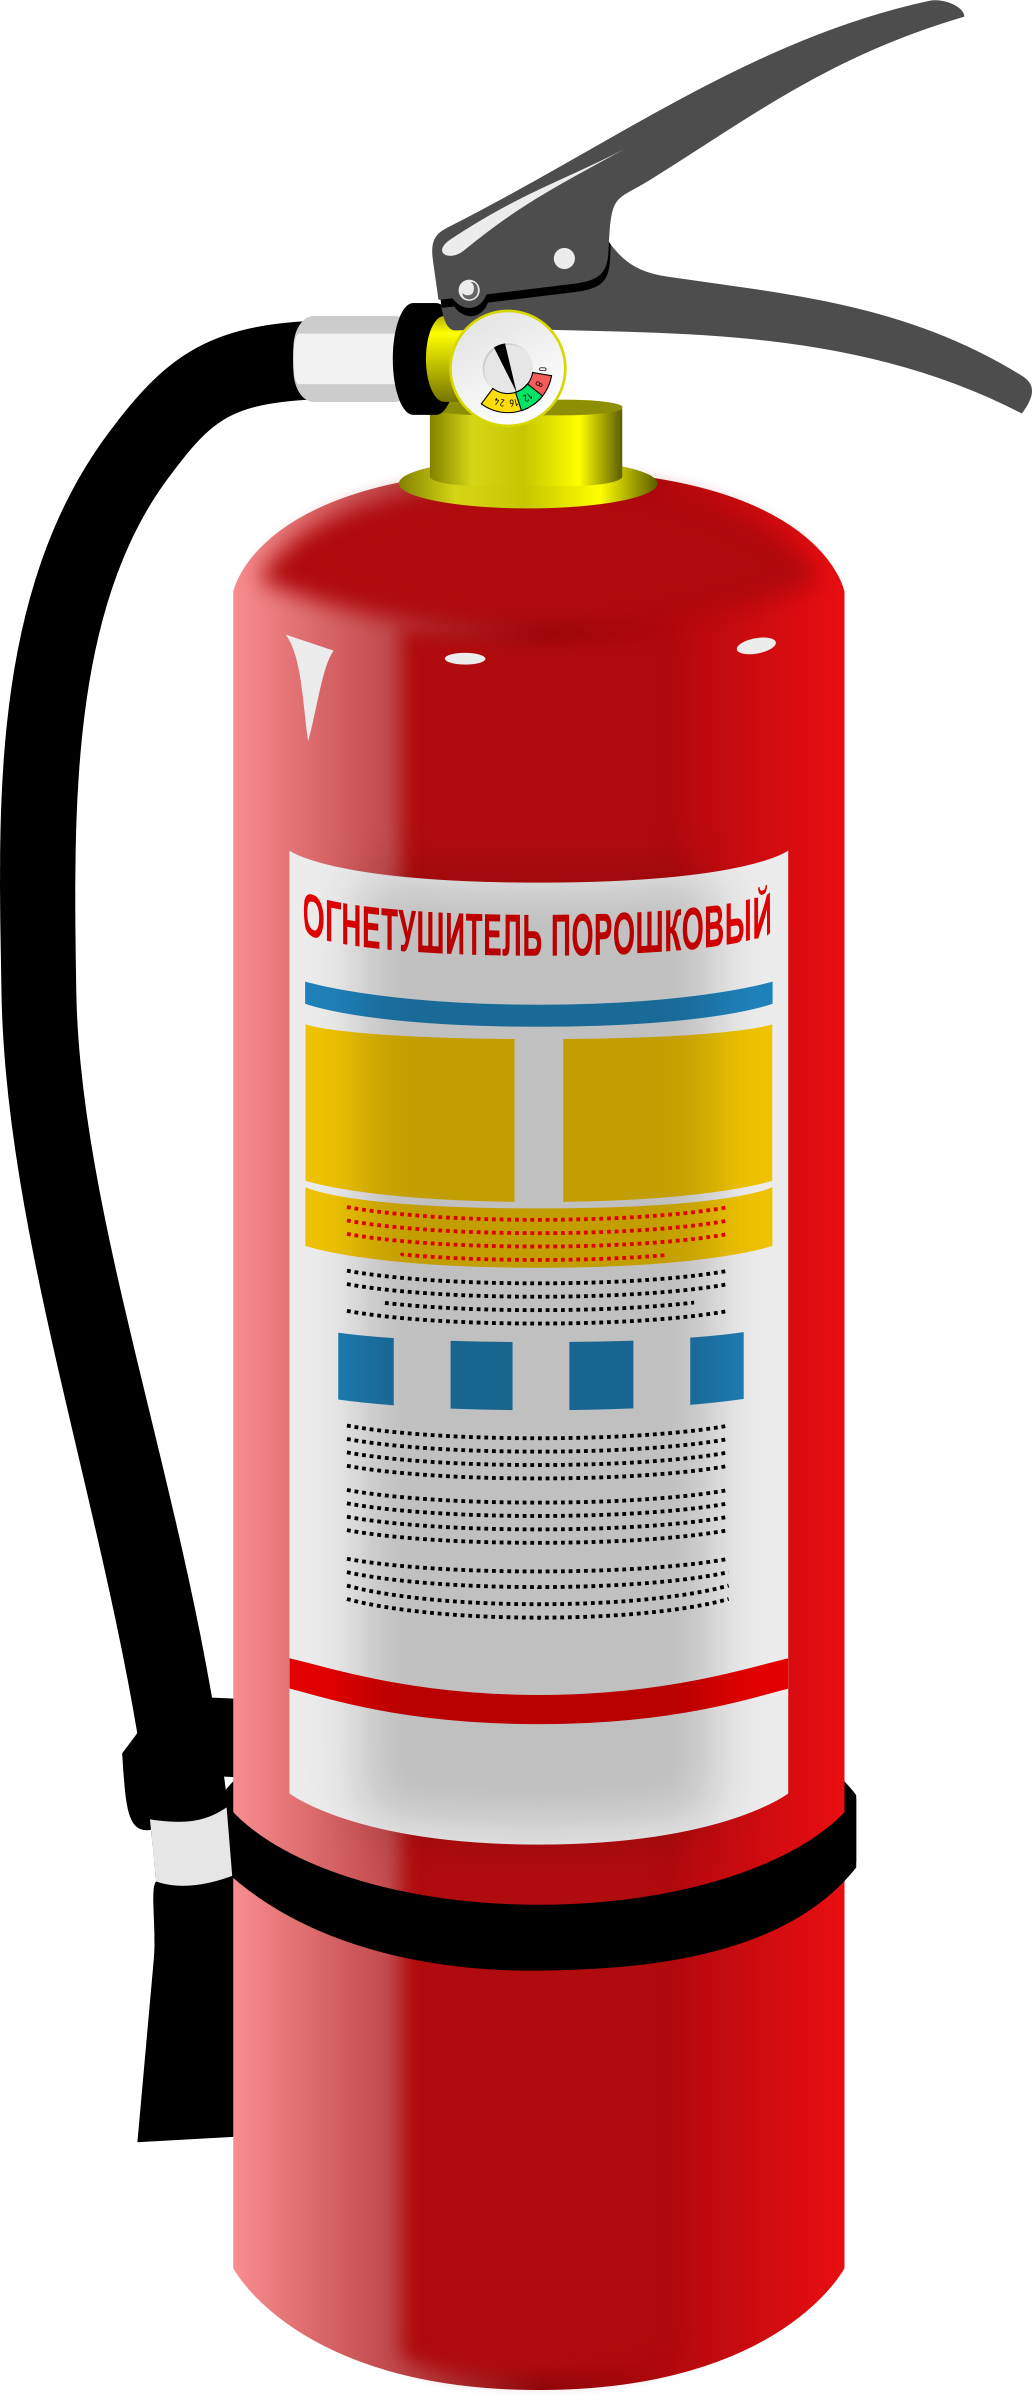 Red fire extinguisher materia